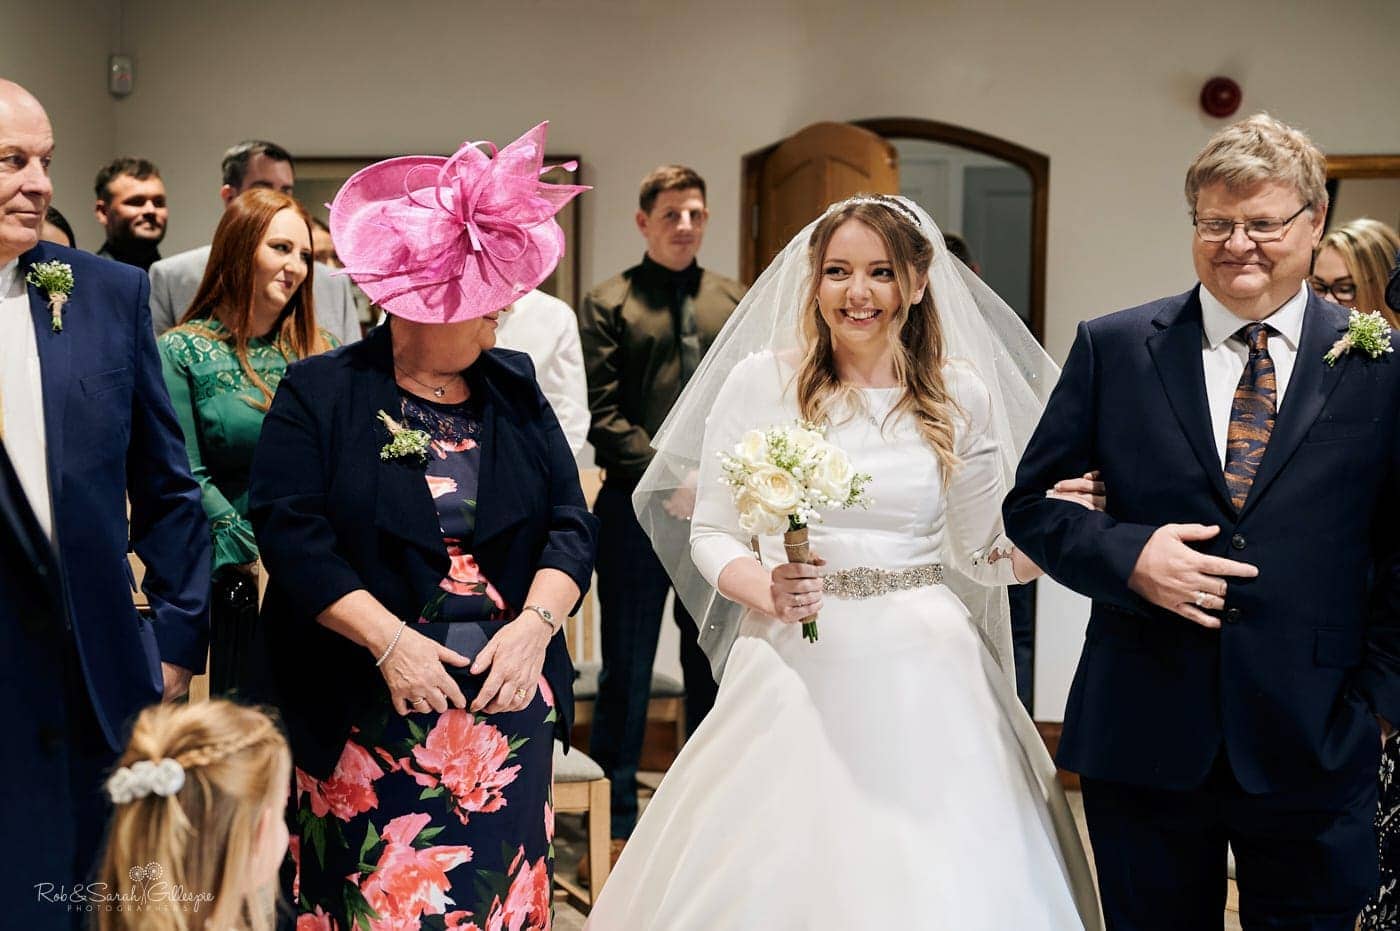 Bride and dad enter wedding ceremony at The Henley Room in Stratford-upon-Avon